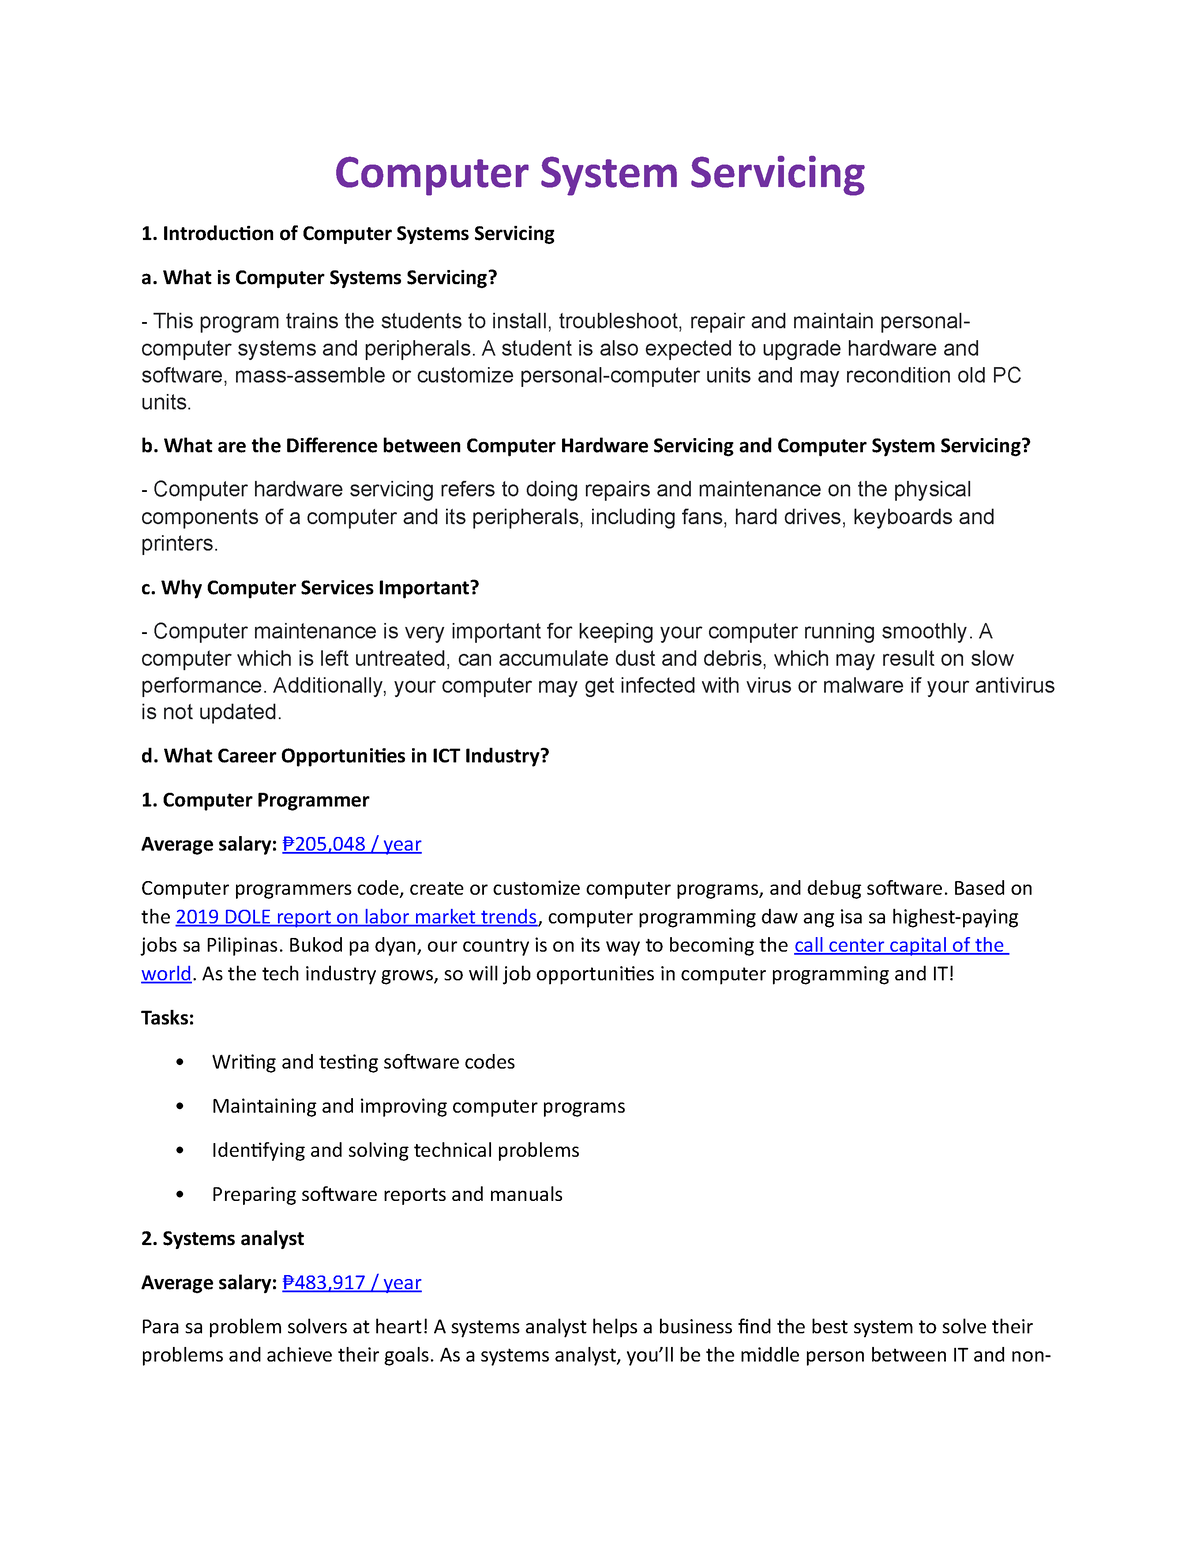 qualitative research title about computer system servicing